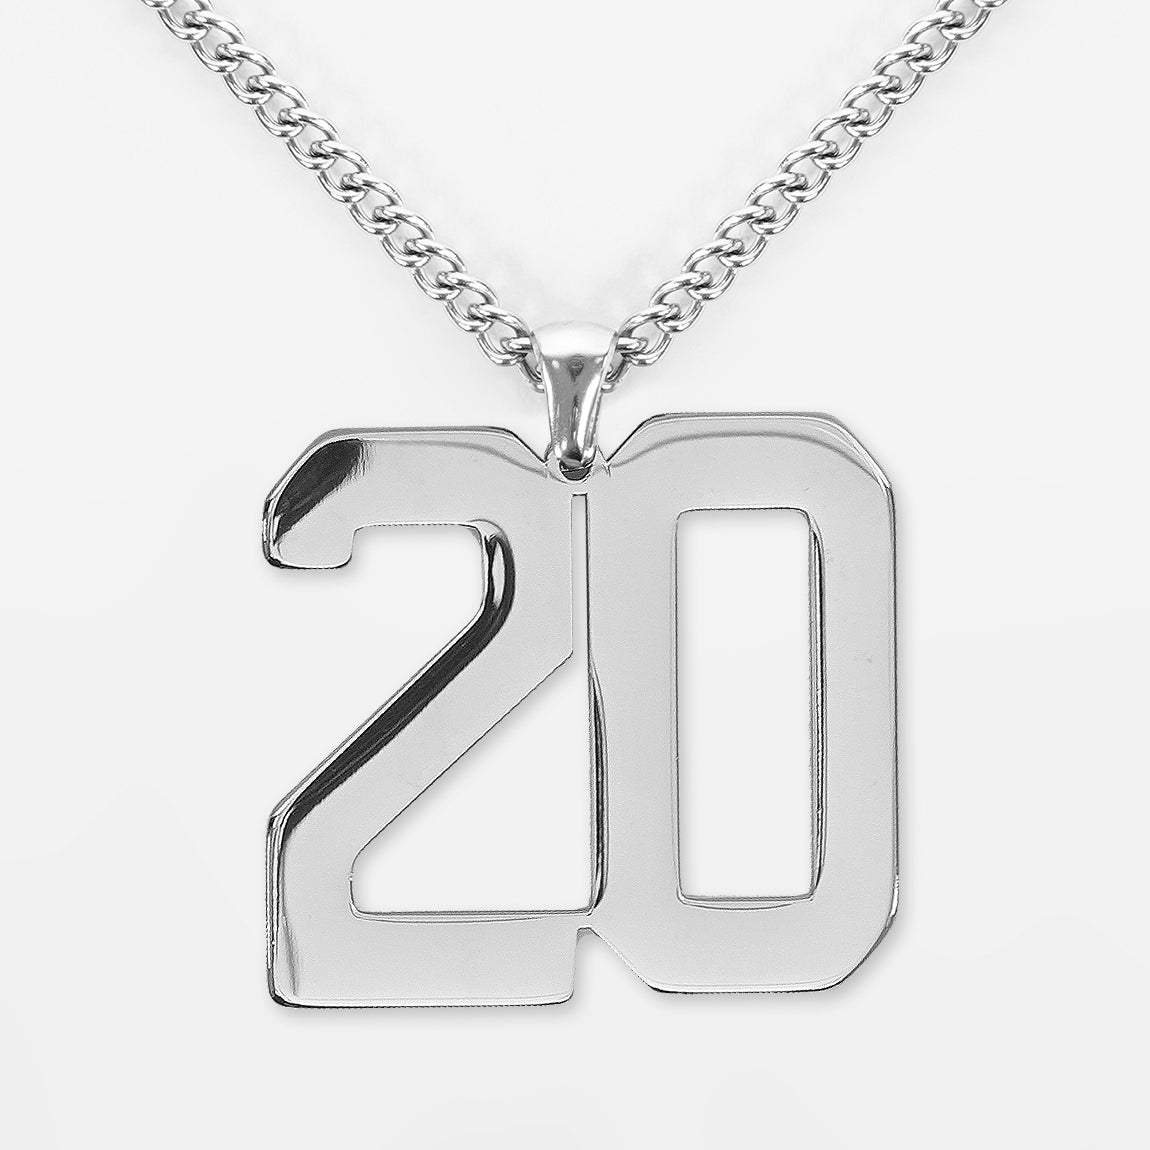 20 Number Pendant with Chain Necklace - Stainless Steel